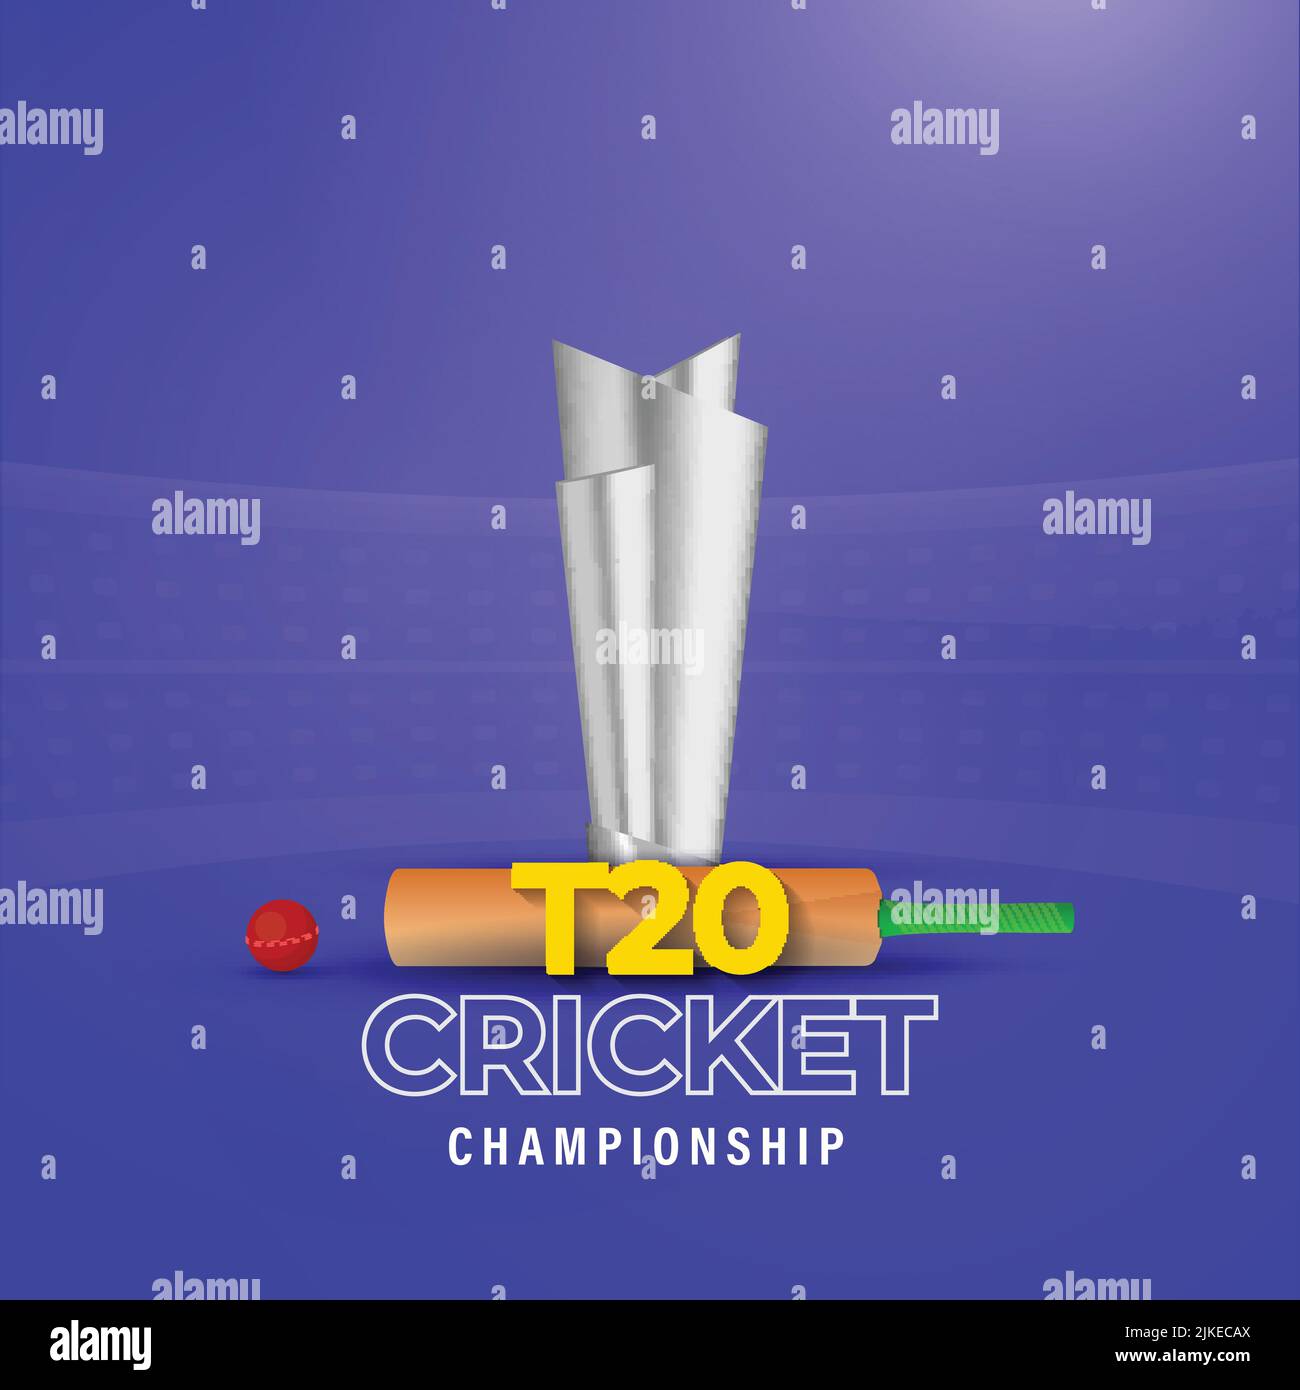 T20 Cricket Championship Concept With Realistic Silver Trophy Cup, Bat, Ball On Blue Background. Stock Vector